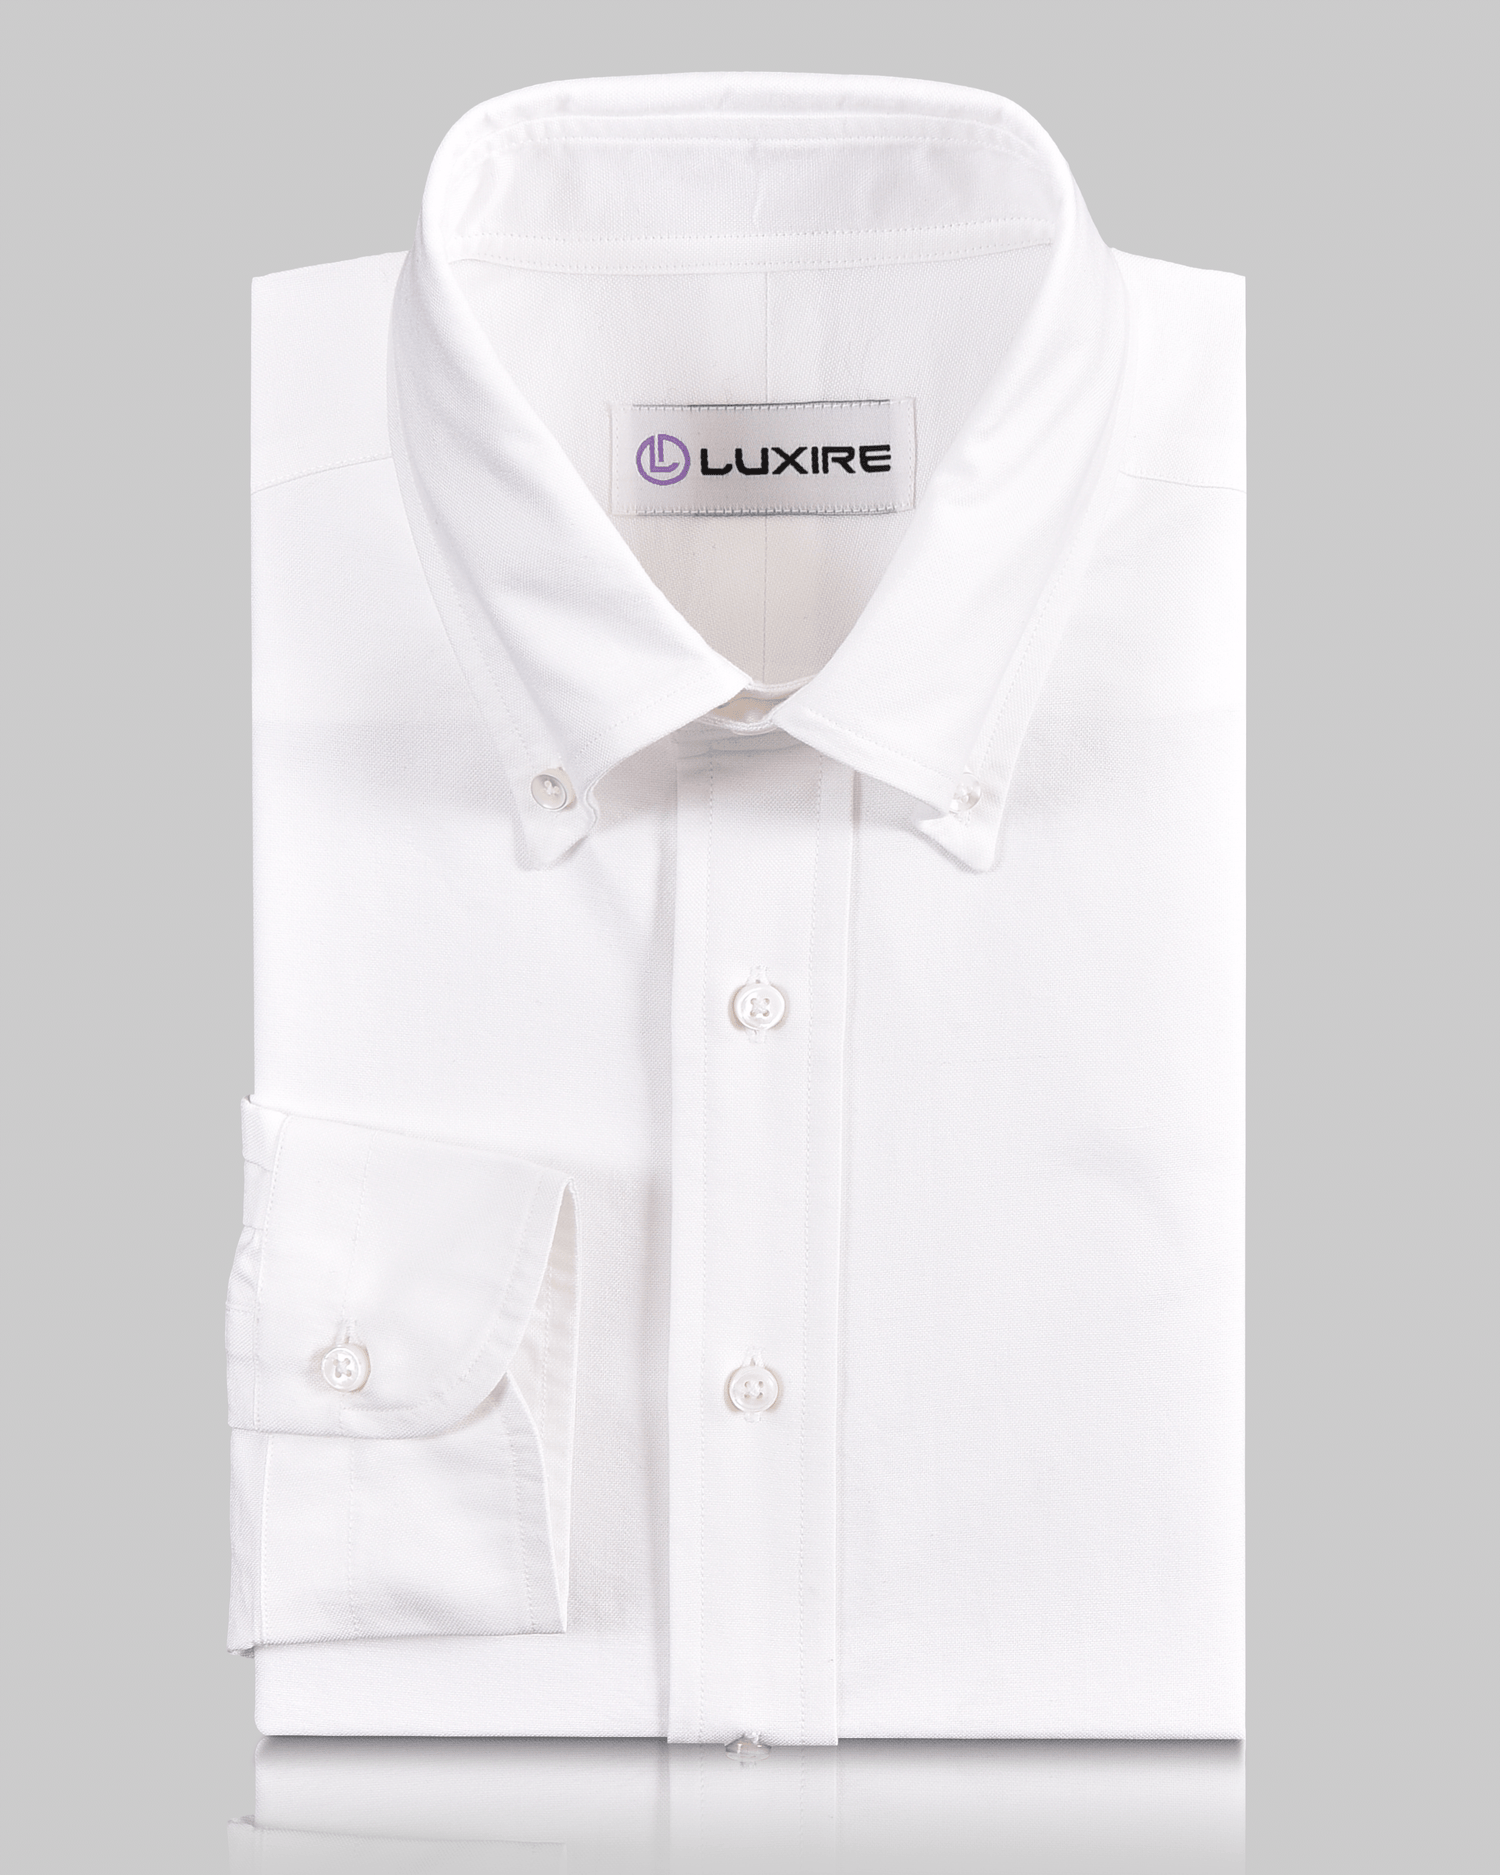 Front of the custom oxford shirt for men by Luxire in warzone white